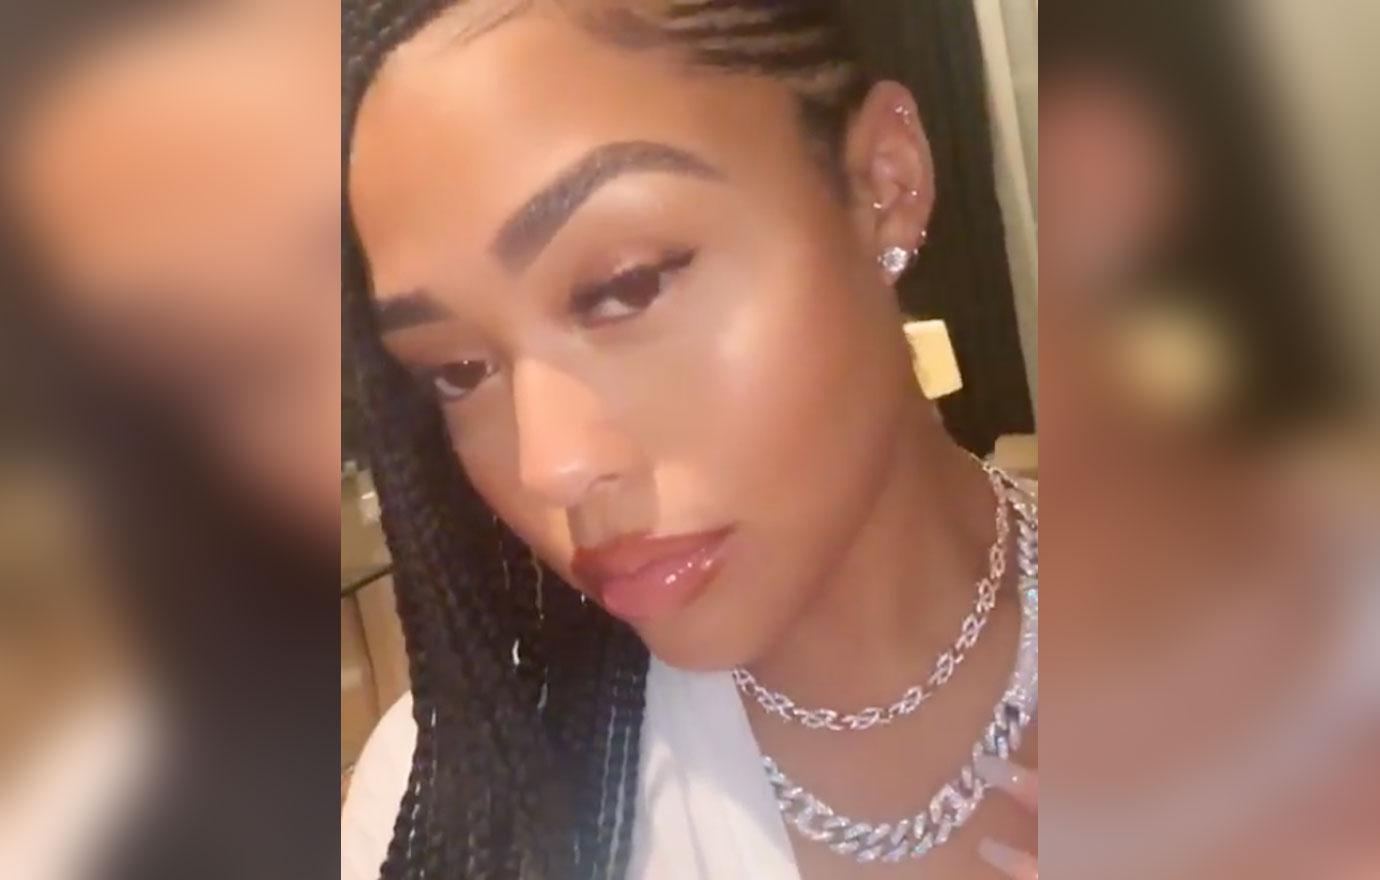 Jordyn Woods and Kylie Jenner Matching Instagrams - Jordyn Woods and Kylie  Jenner Instagram Theory